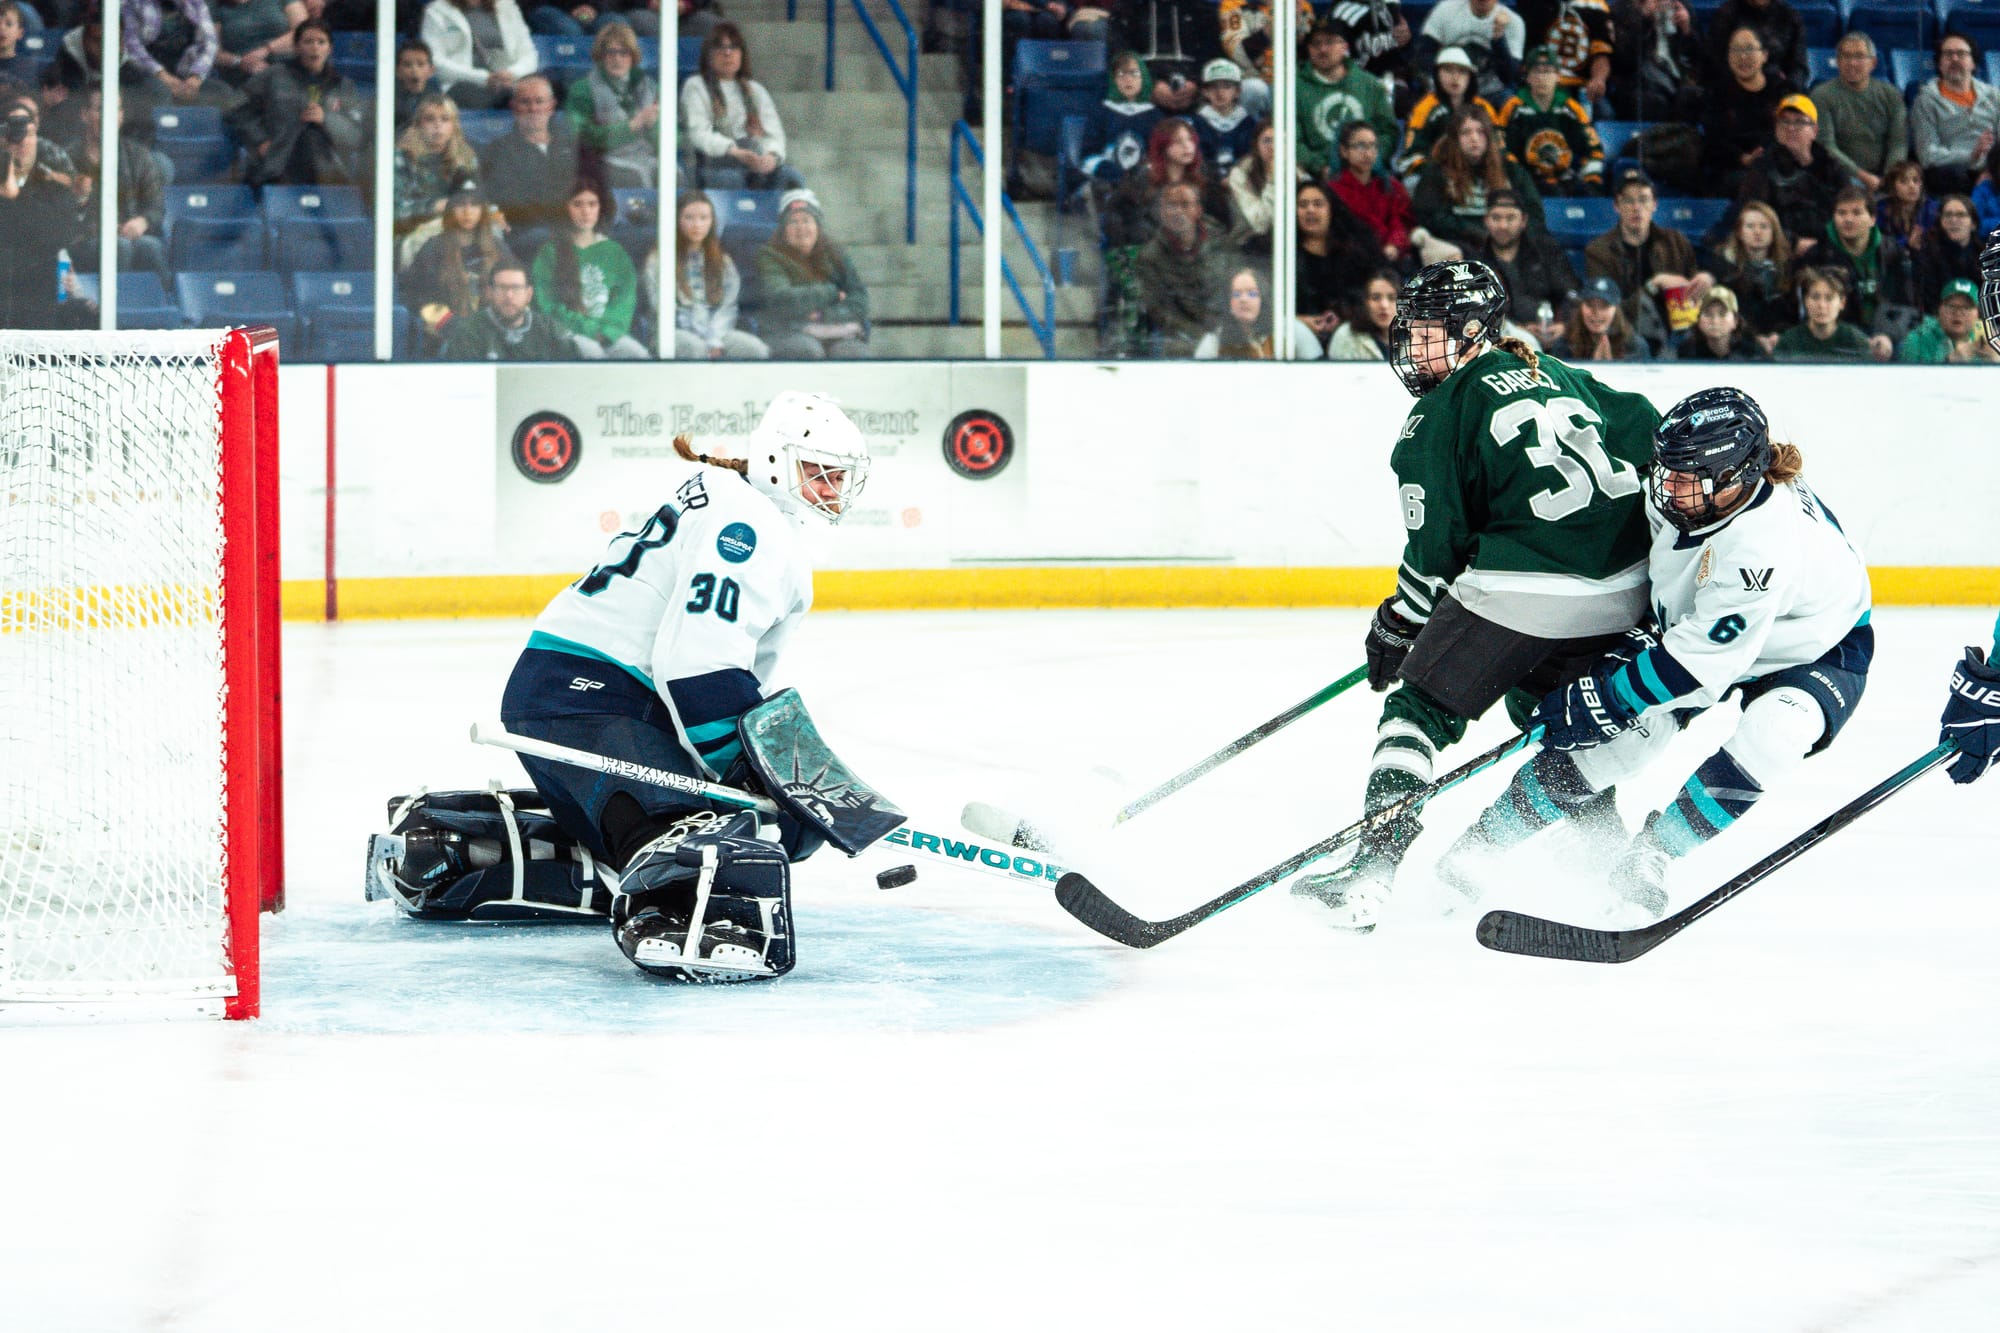 Corinne Schroeder, wearing a white uniform and mask and her Statue of Liberty themed pads, makes a save against Boston. 